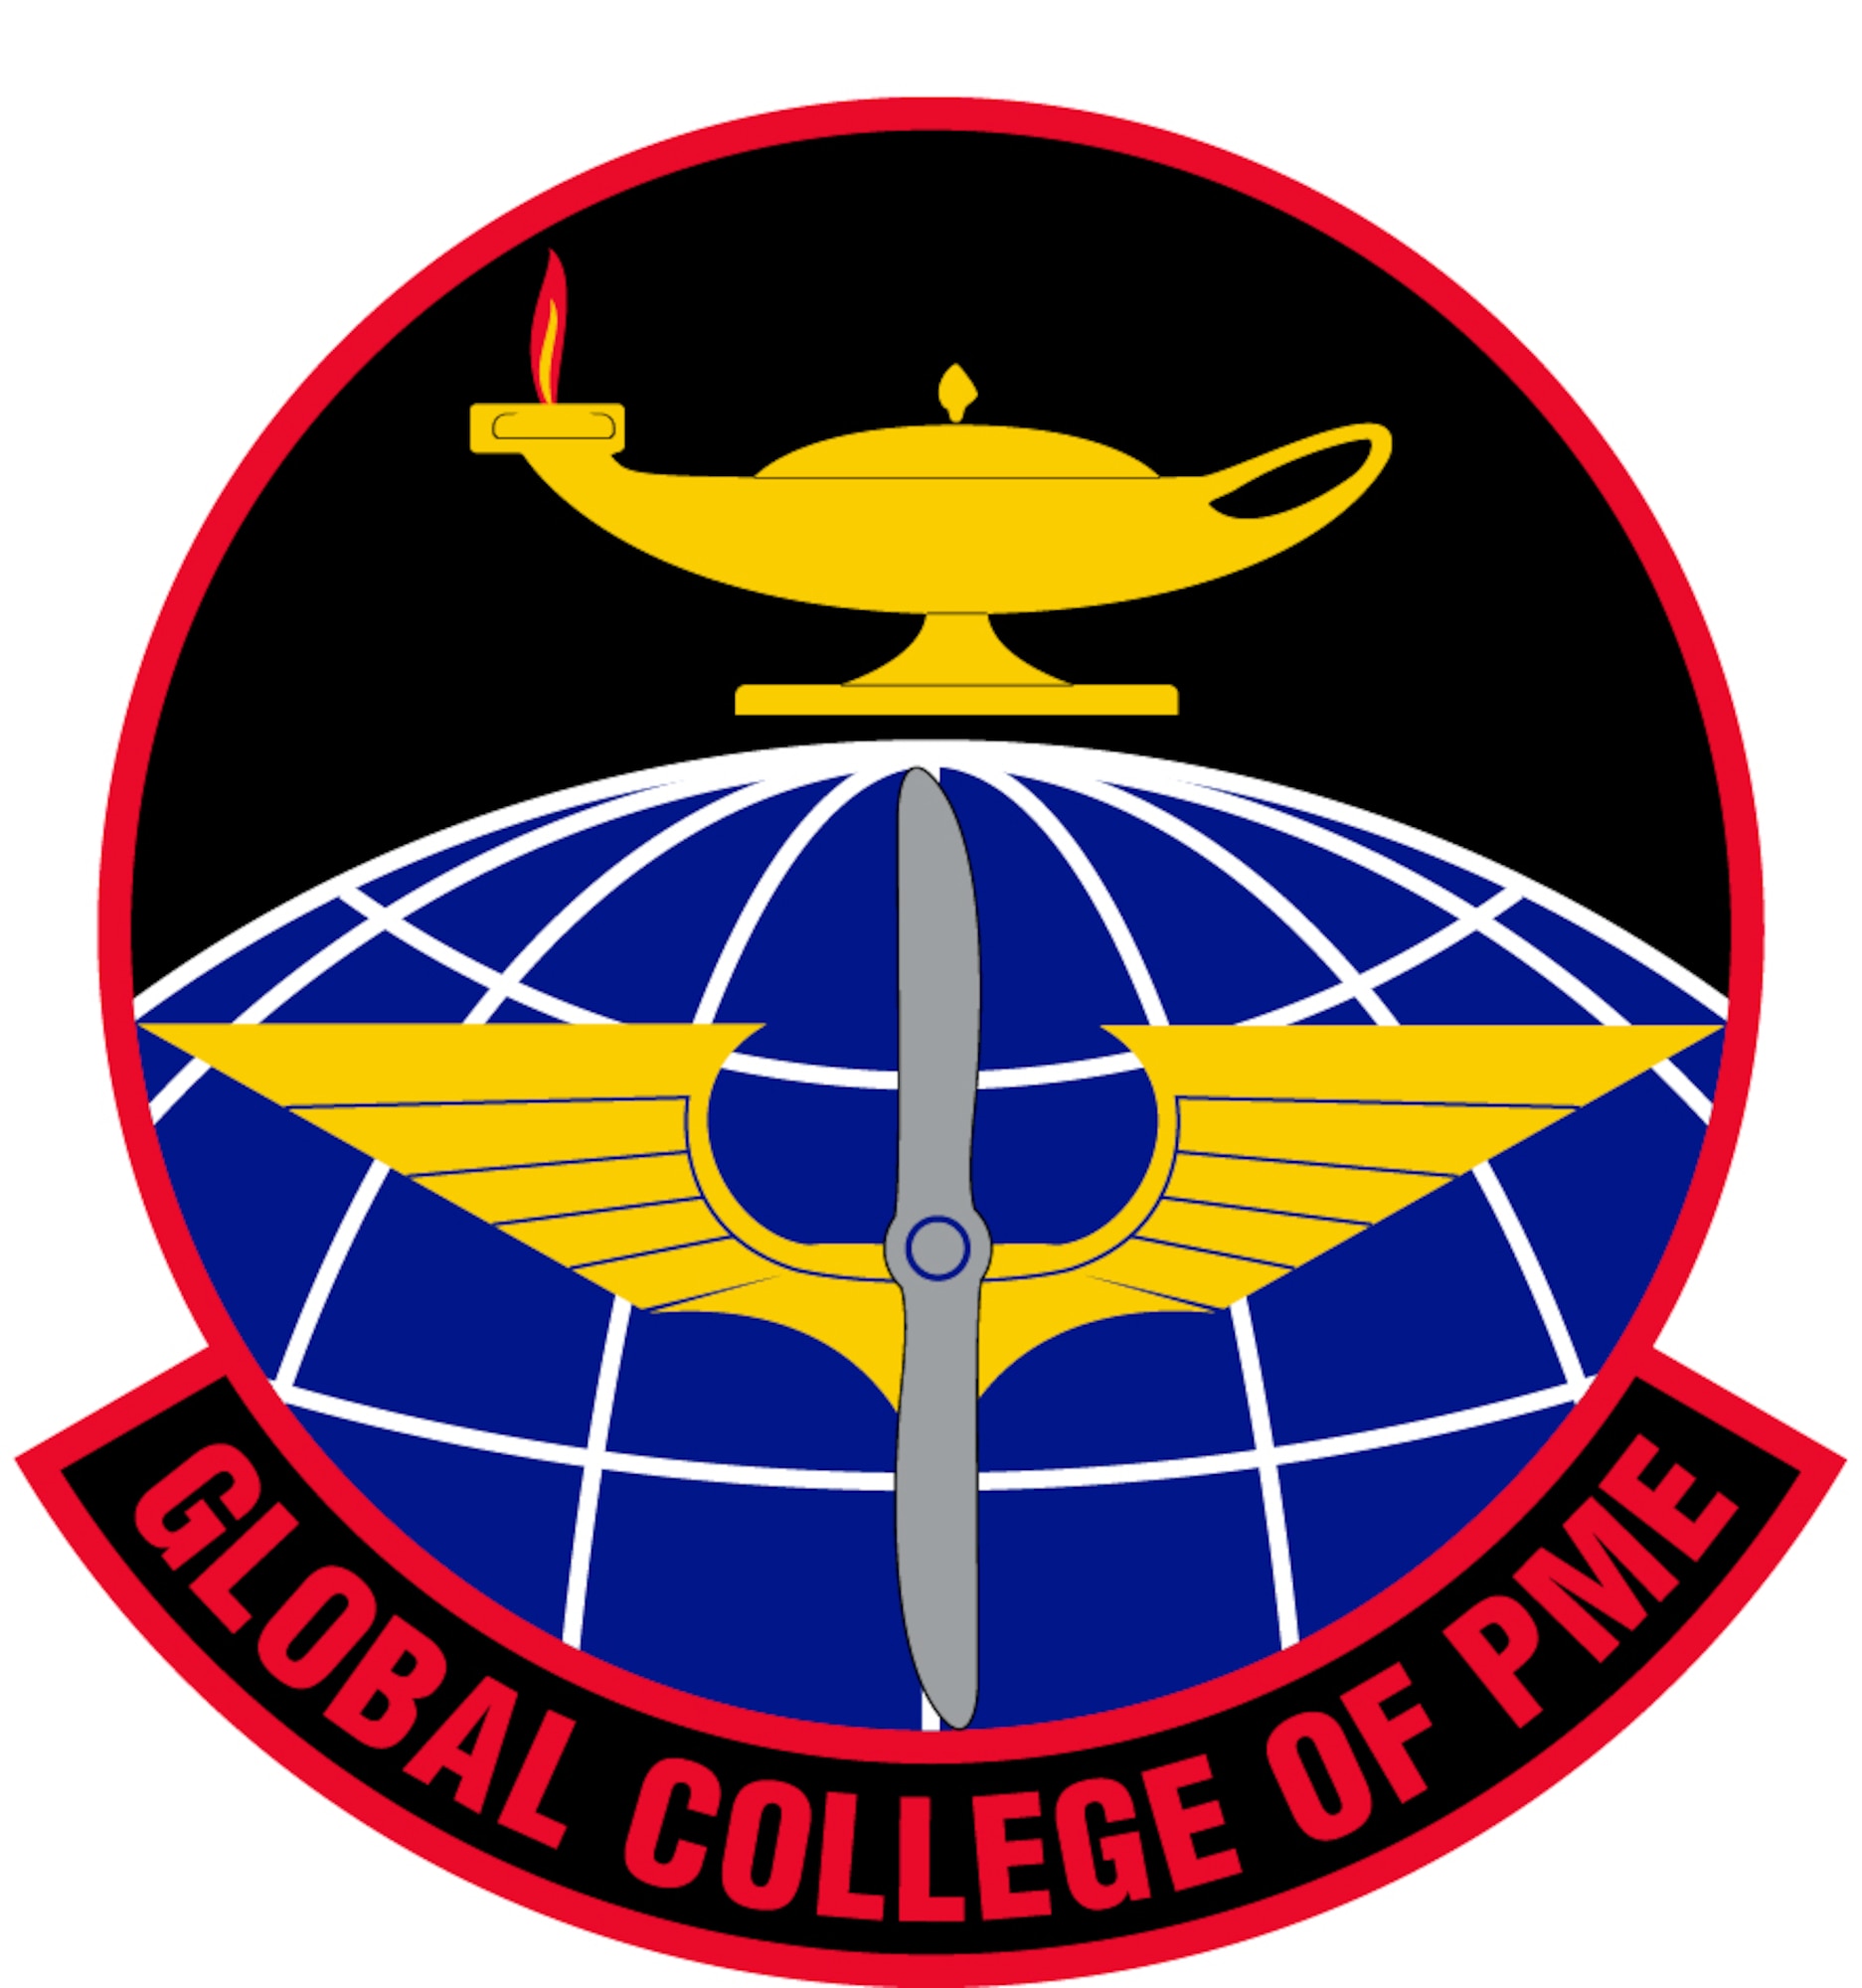 Enrollments for new officer professional military education distance learning students will be back on-line on Sept. 6, 2022.    
The distance learning programs for Squadron Officer School, Air Command and Staff College and Air War College have been closed for enrollments and graduations since July 7, 2022, in support of the Air University-wide transition to the new Learner Environment Design-Student Information System.